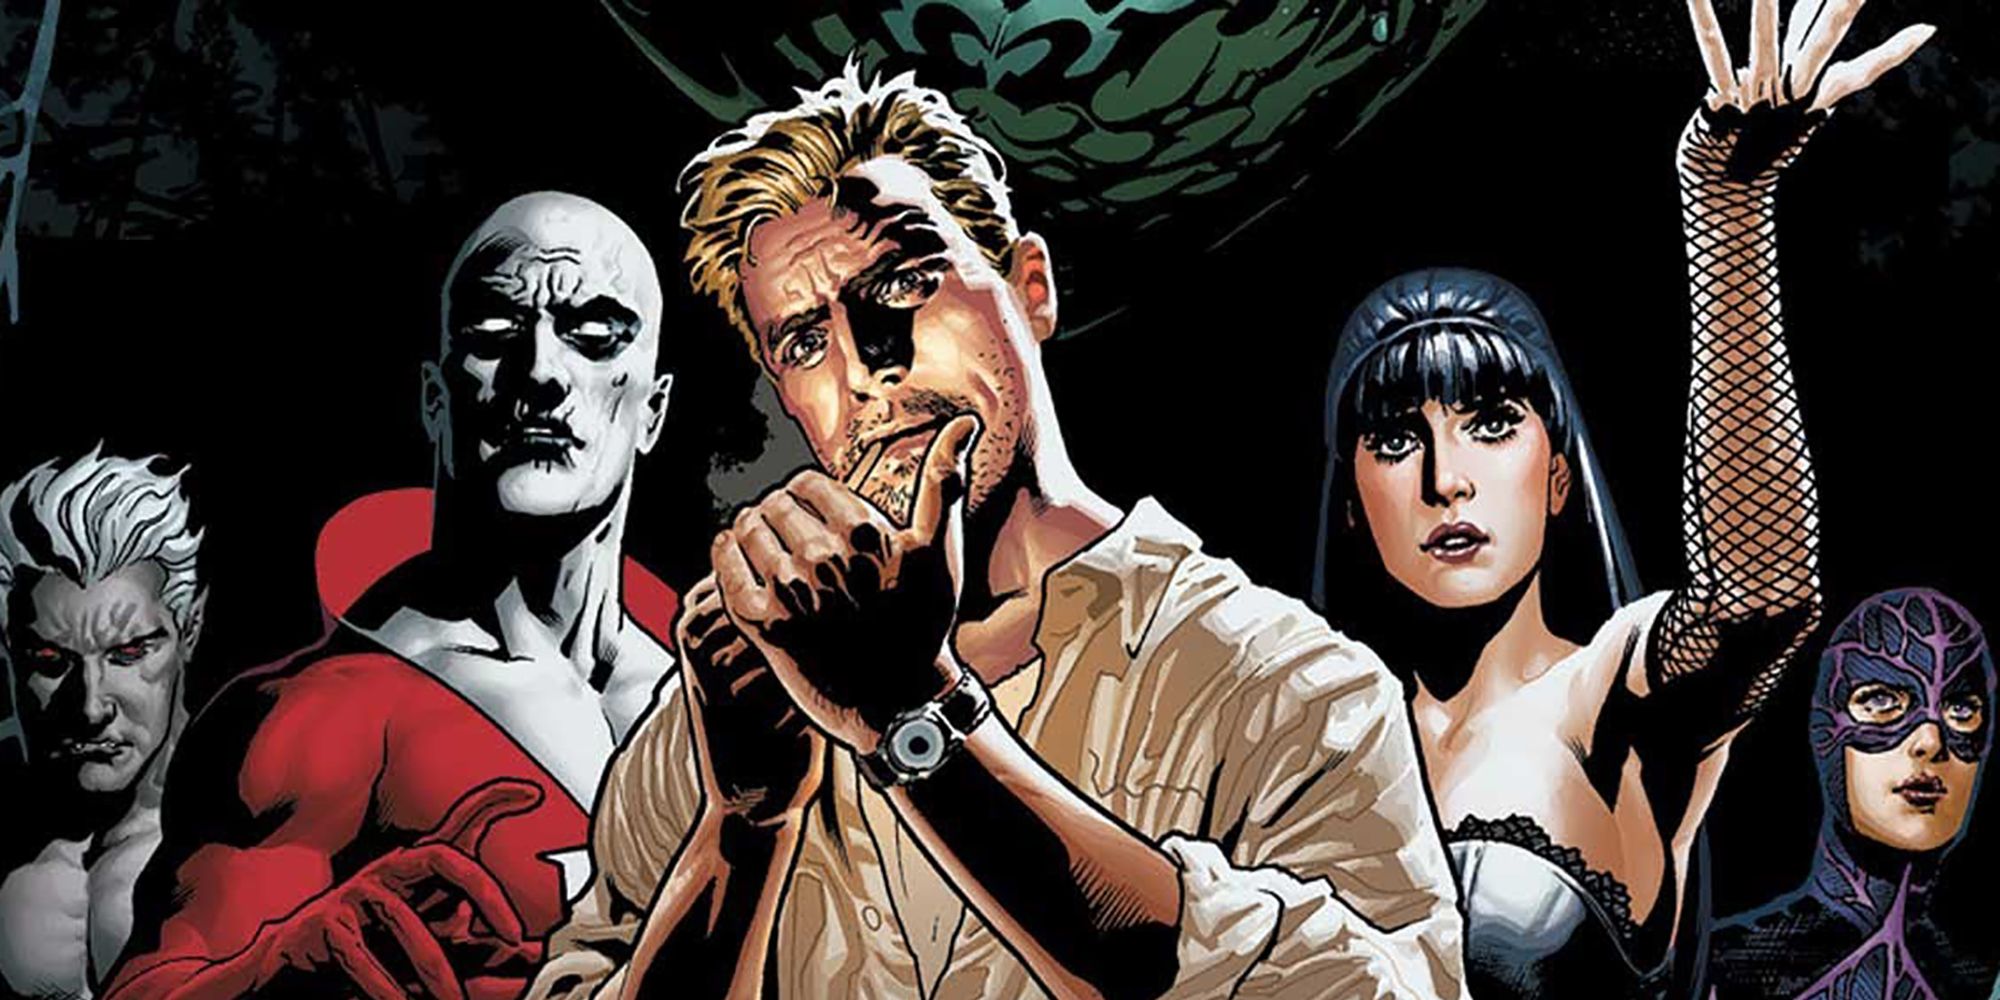 a promotional image for Justice League Dark featuring John Constantine (smoking), Madame Xanadu (with her hand lifted), Deadman, Andrew Bennett and Black Orchid in a row 